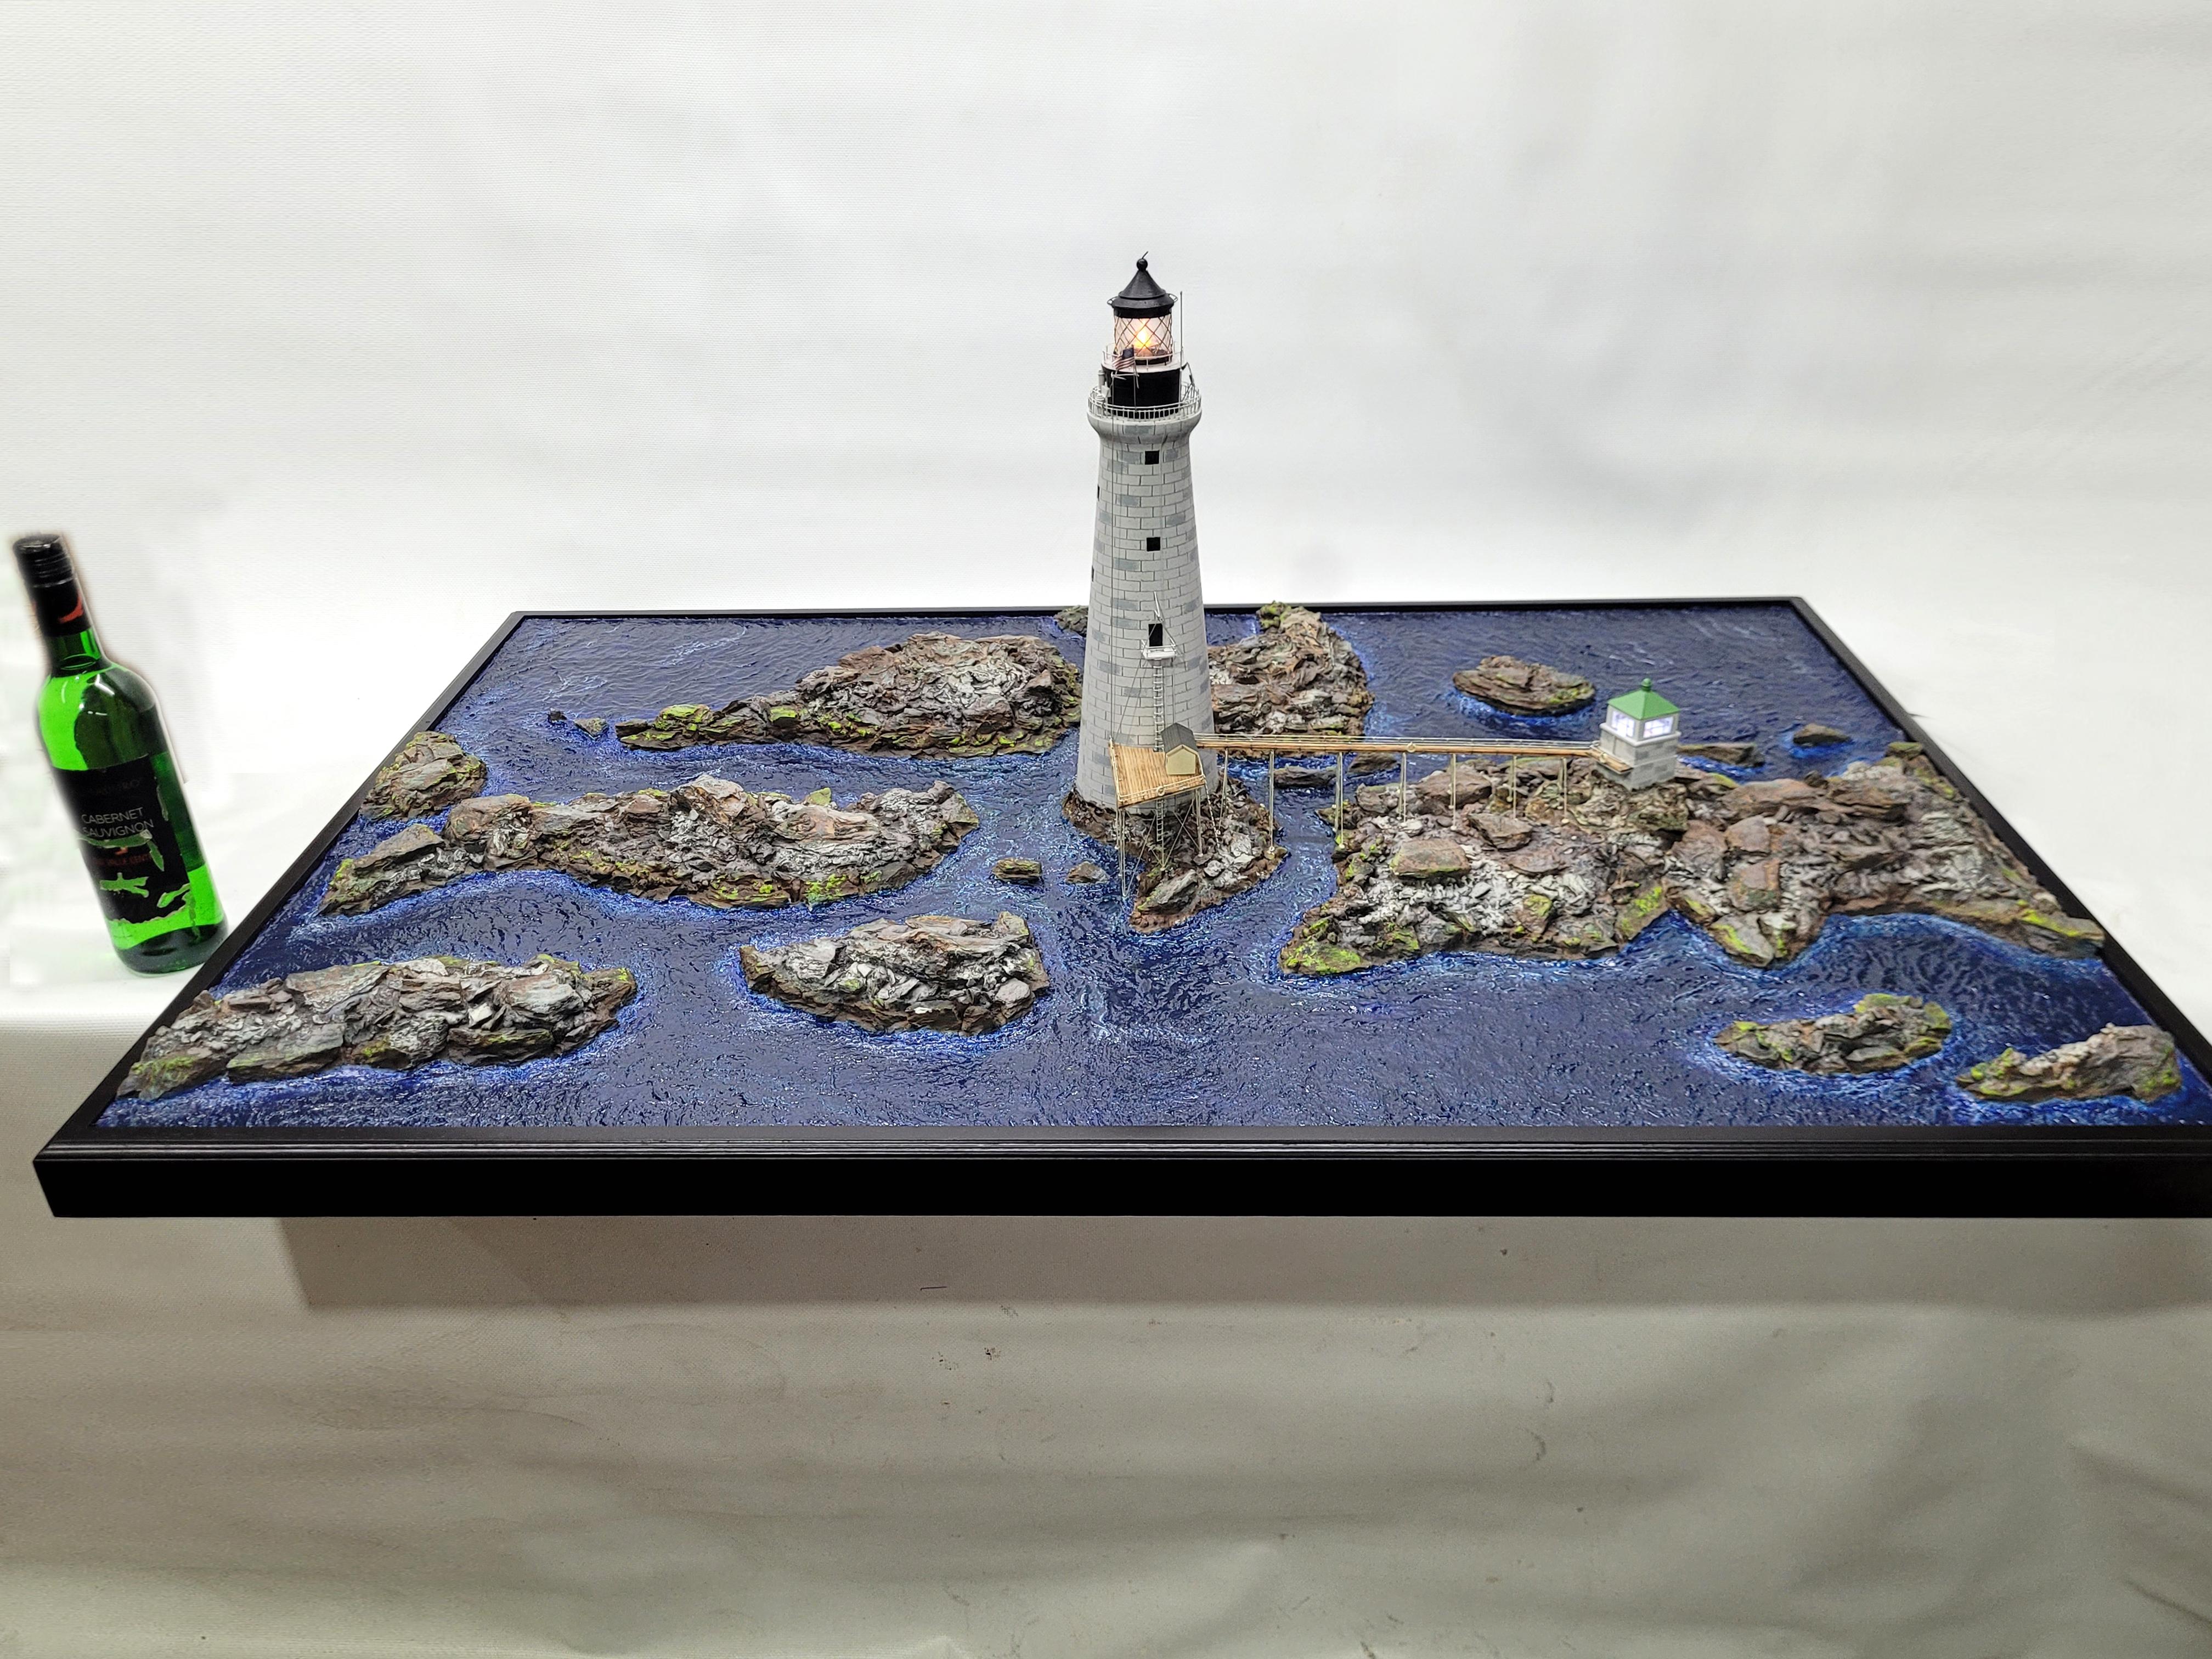 Remarkable diorama showing graves light in Boston Harbor. This is expertly crafted with proper scale. The granite stone tower is expertly crafted with a turned wood cylinder incised with the same amount of blocks, then distressed. The lantern room